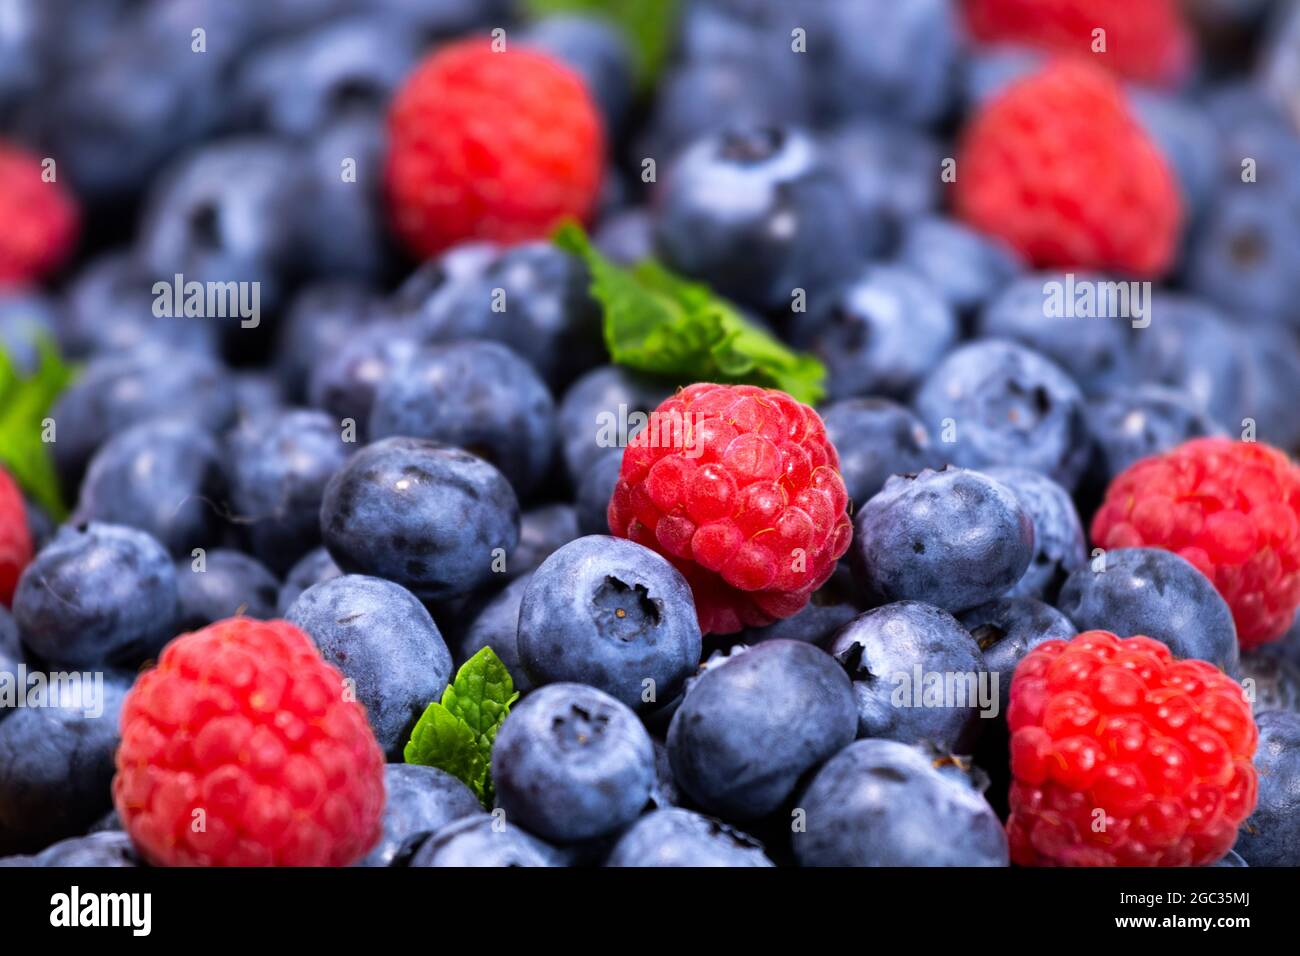 Blueberry and Raspberry with mint background. Top view. Close up view of fresh ripe mixed berries. Summer Fruits, Copyspace Stock Photo